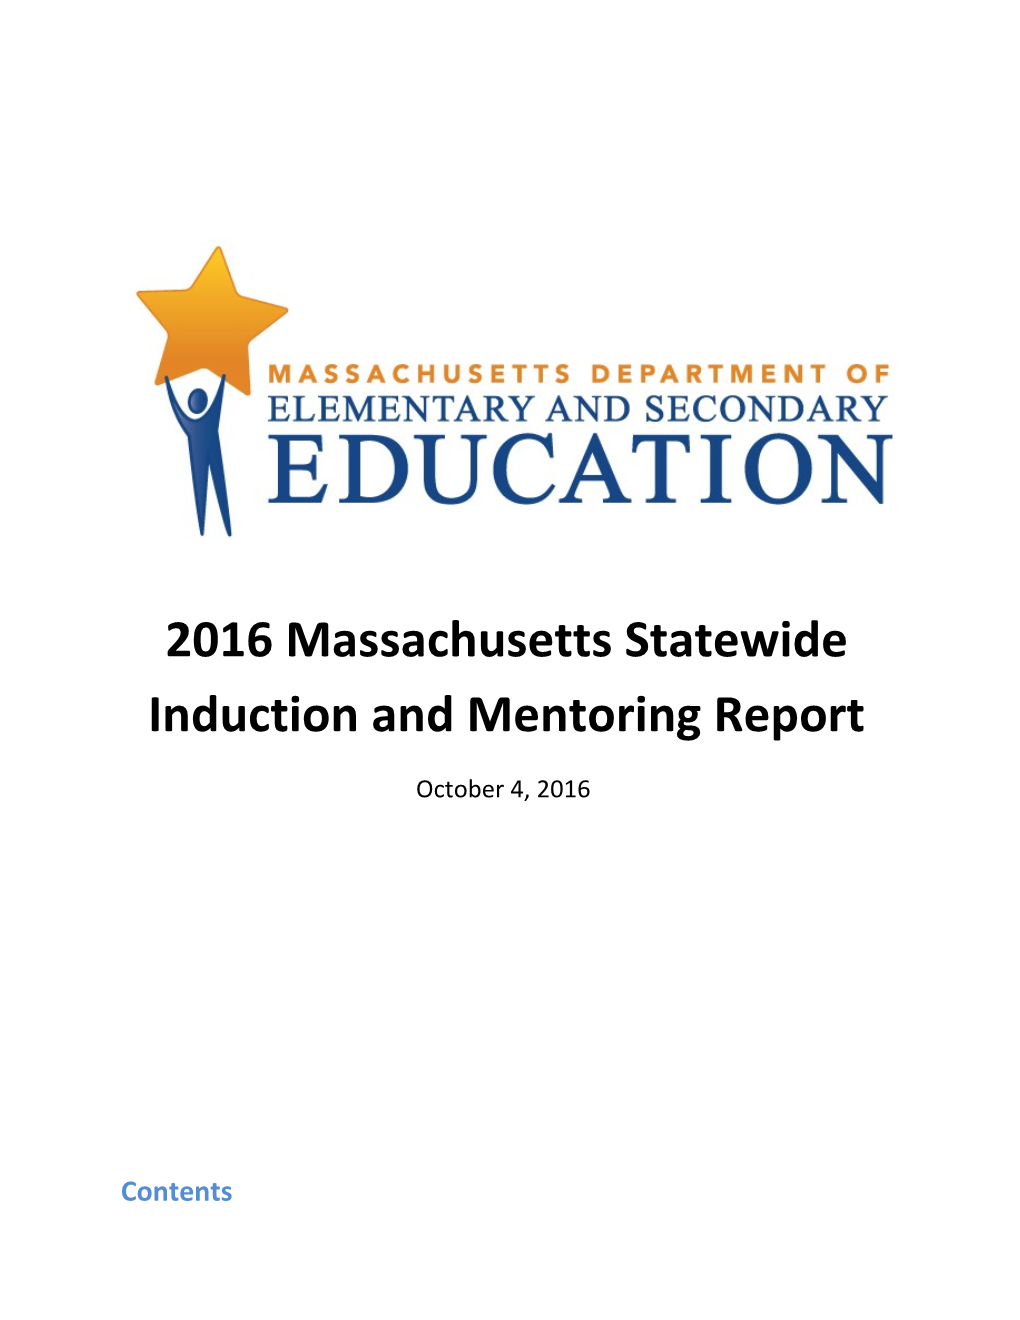 2016 Induction and Mentoring Report